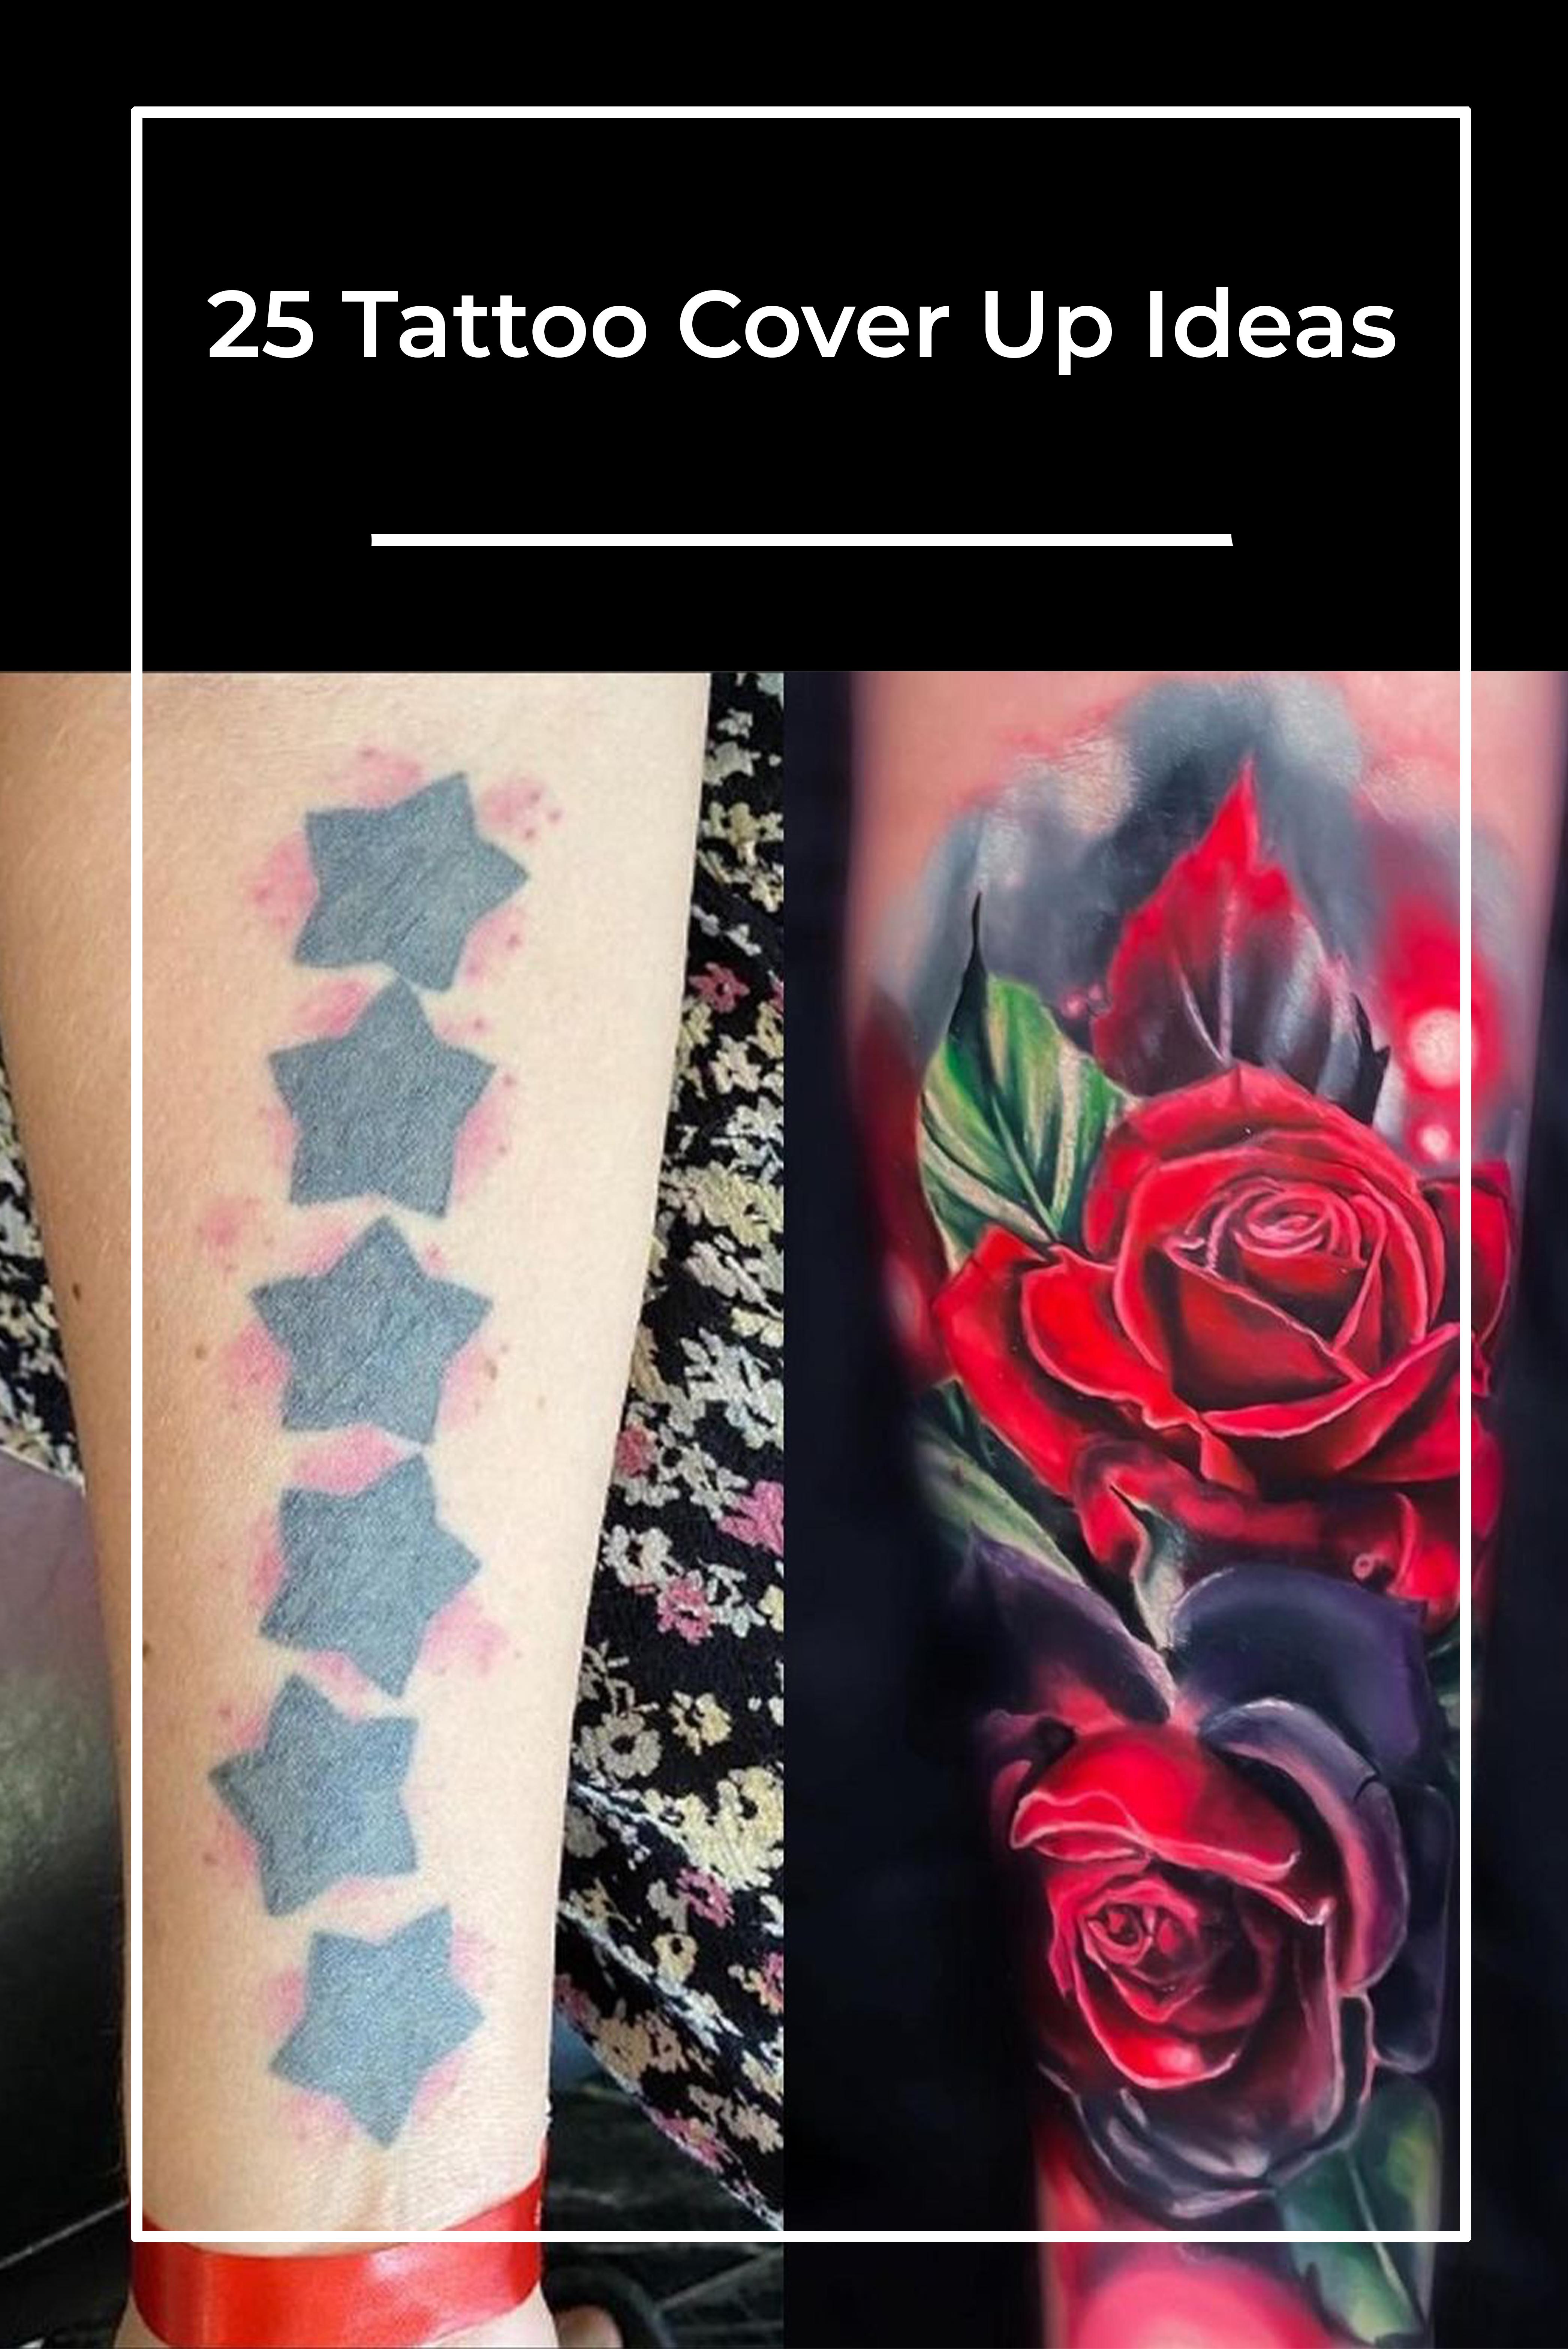 Covering A Bad Tattoo - Types Of Cover-Up Tattoos -